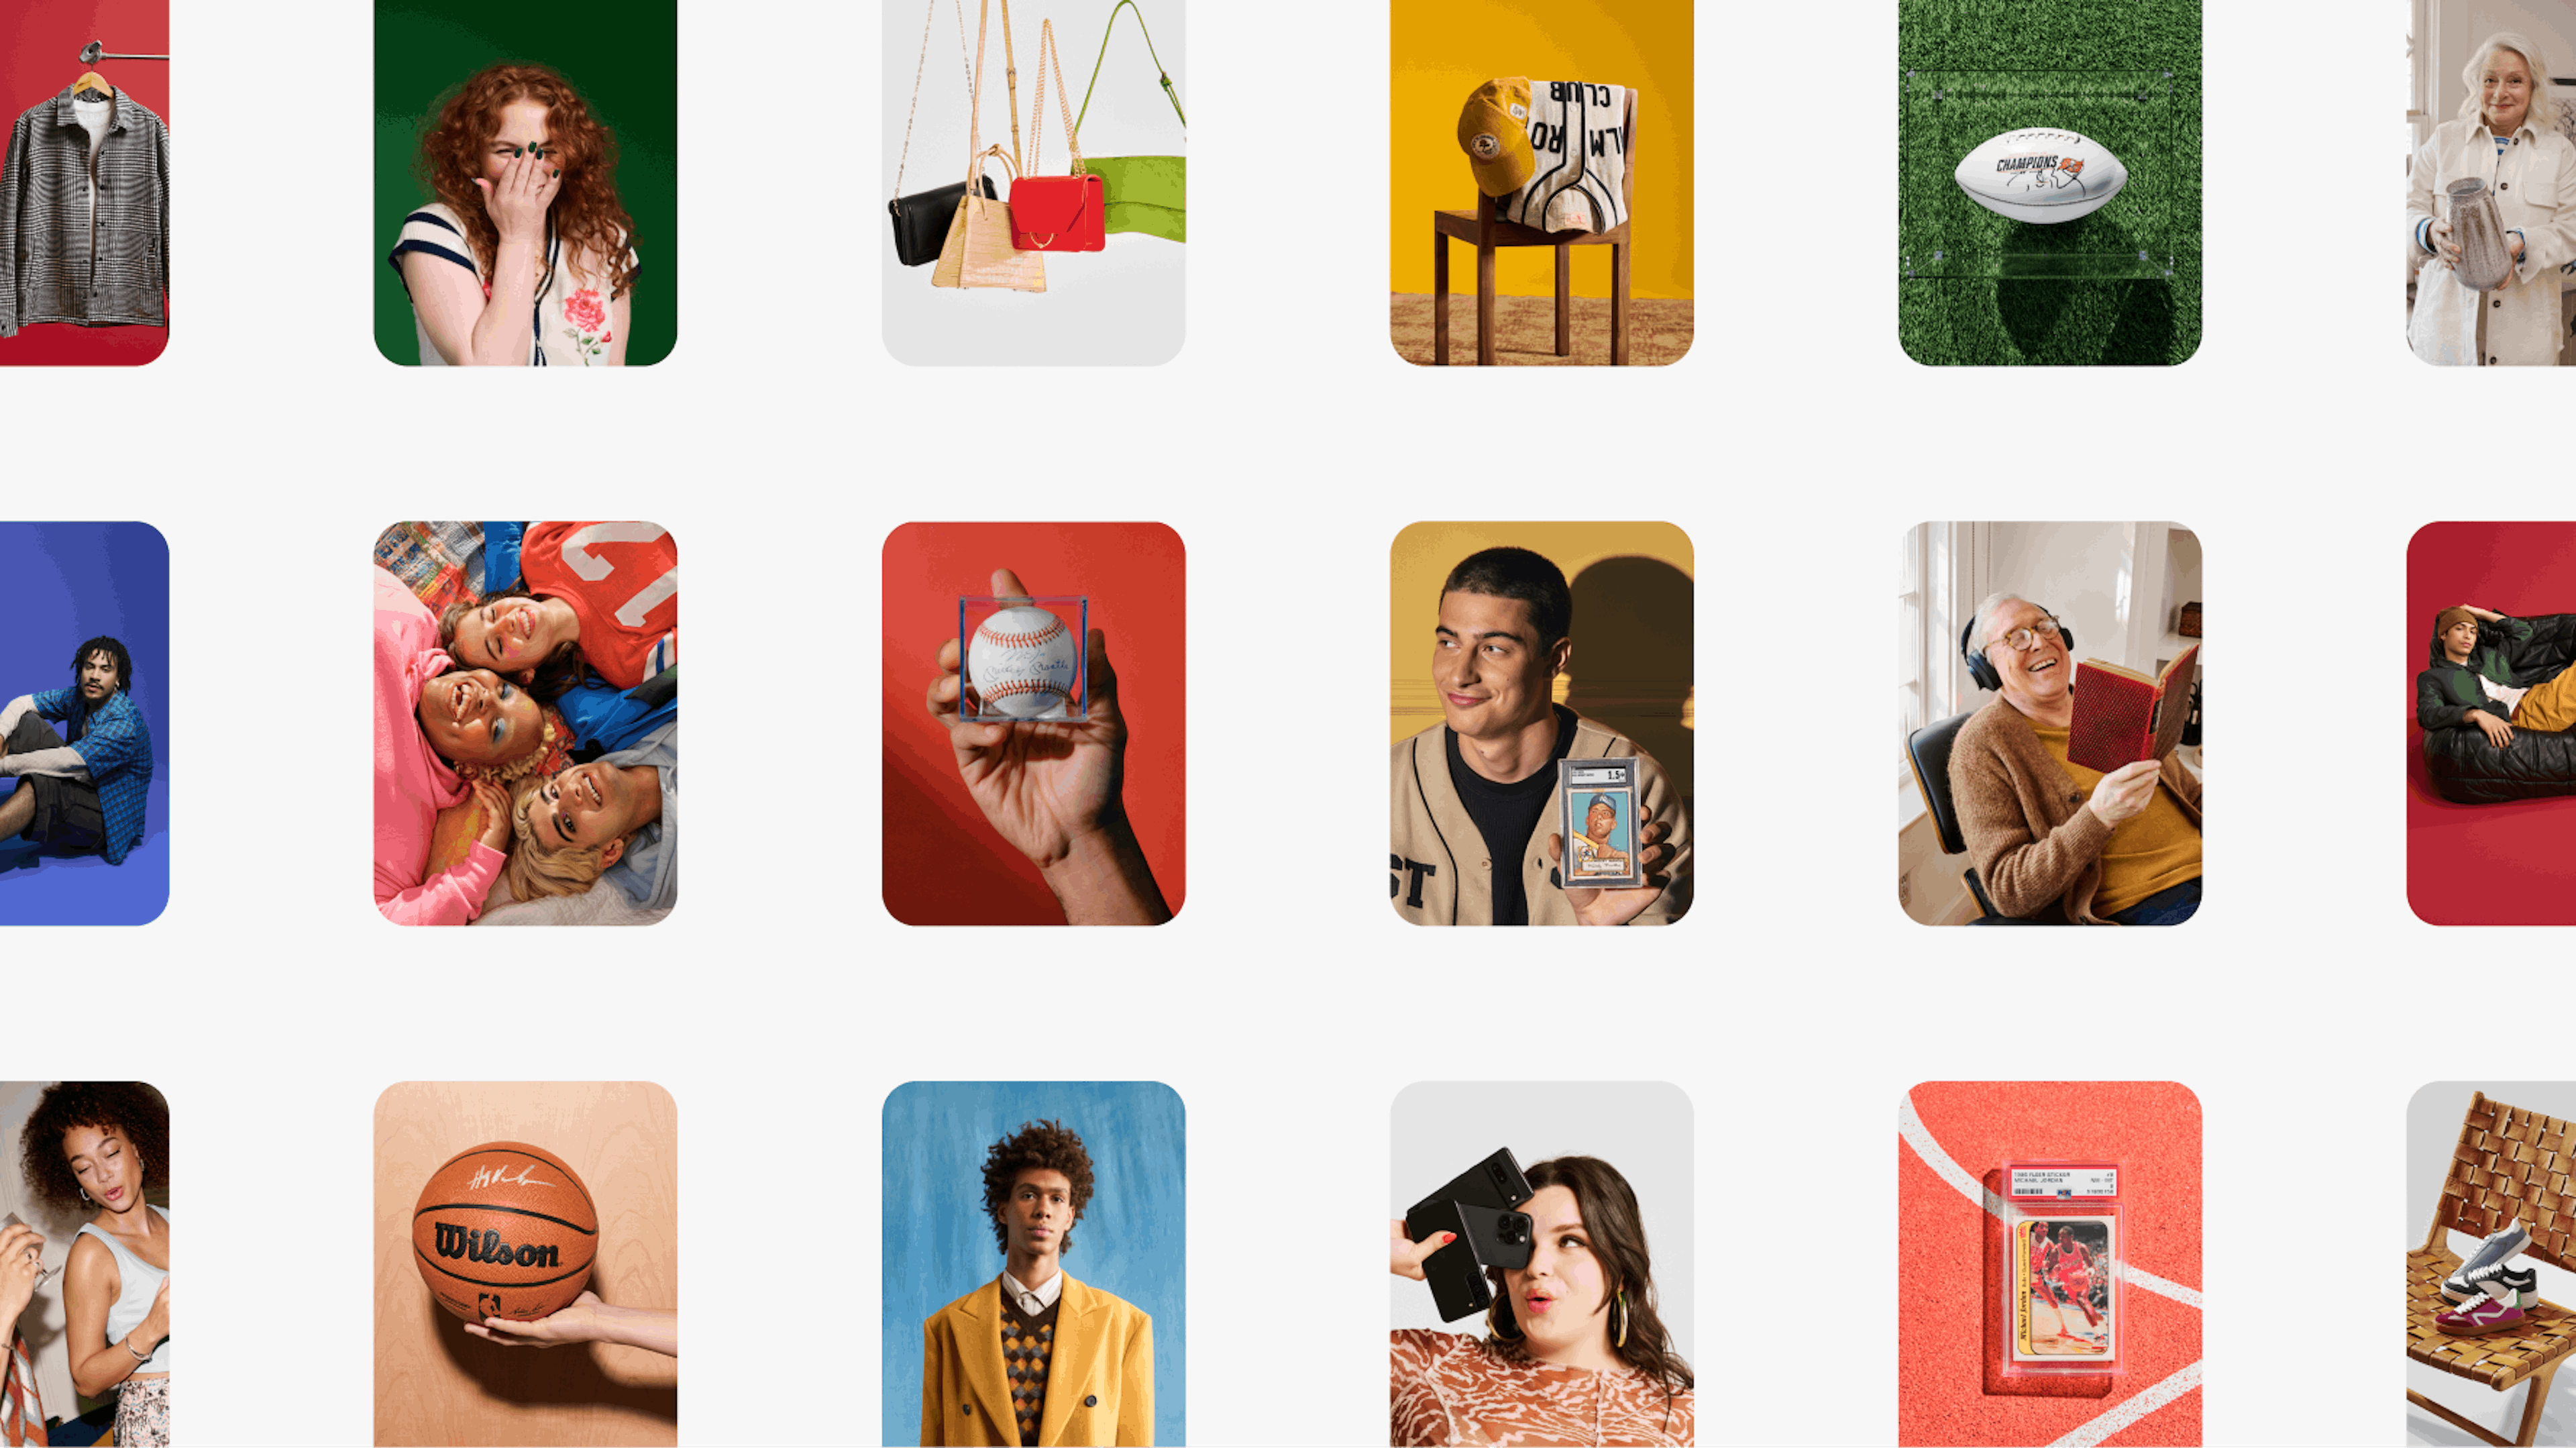 A grid of brand photos full of colorful backgrounds and studio shots featuring collectibles, jewelry, fashion, and sports items.